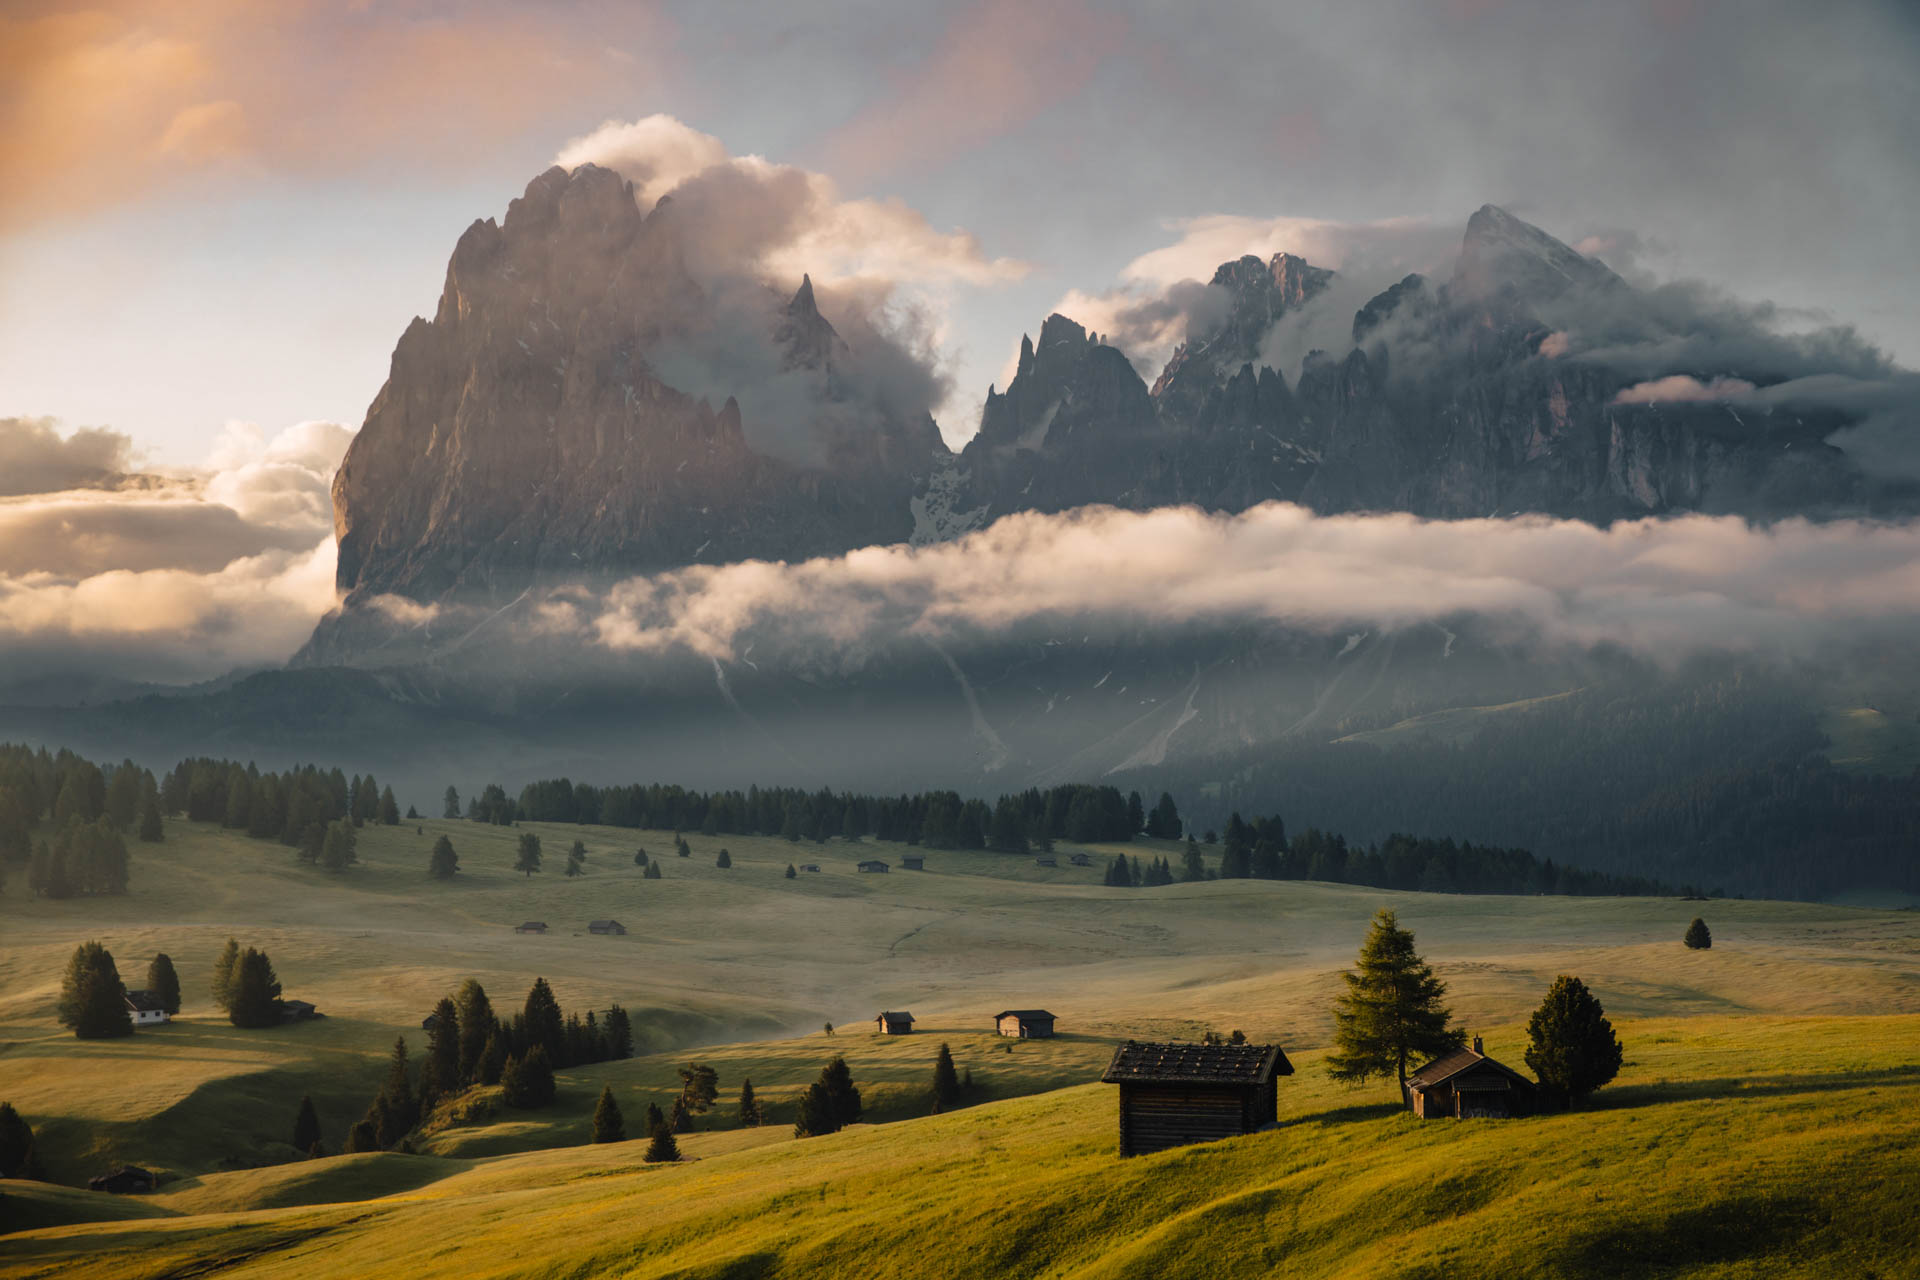 things to do in dolomites, dolomites things to do, best places to visit in dolomites, dolomites attractions, what to do in the dolomites, things to do in the dolomites, alps di siusi